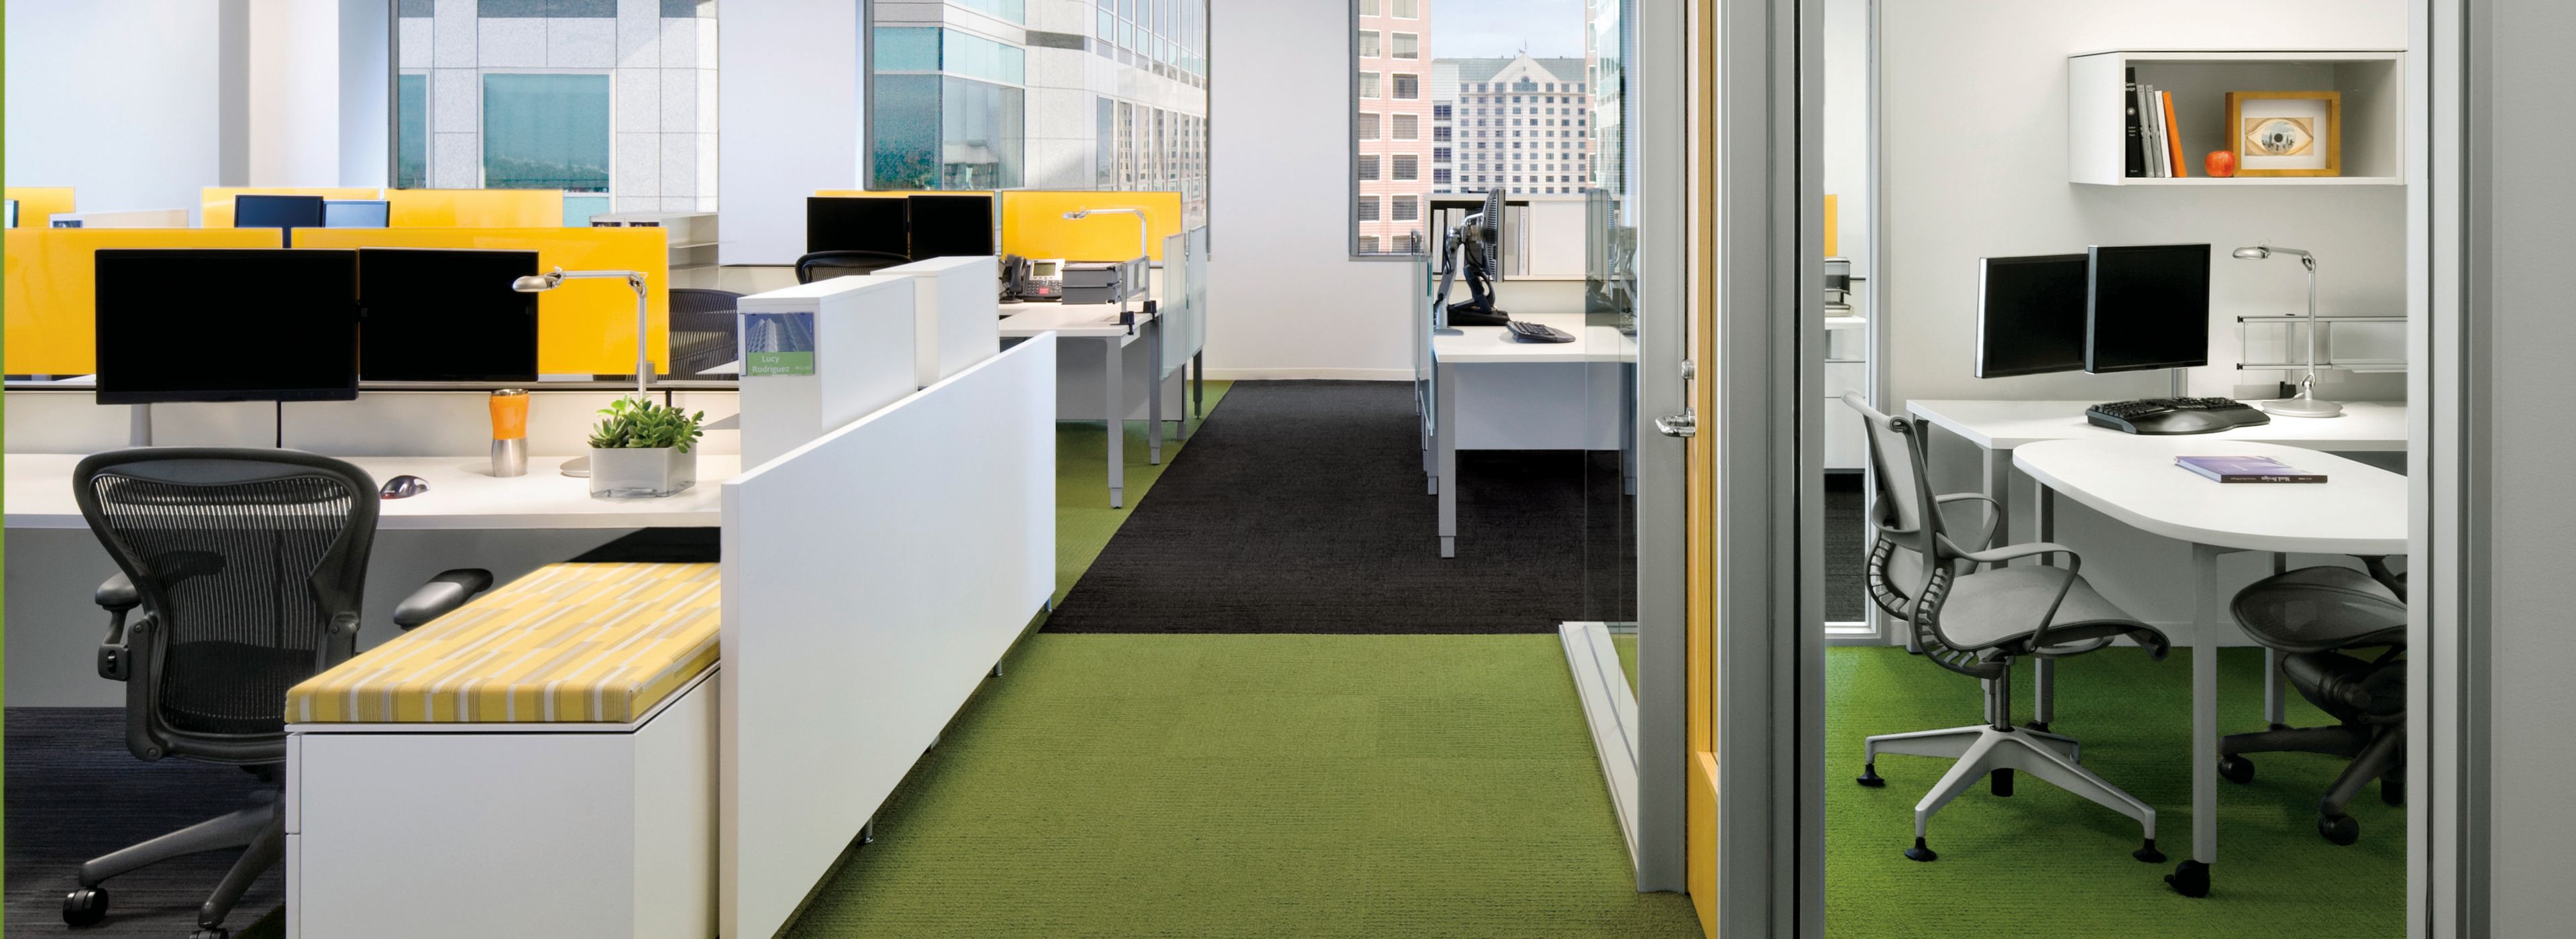 Interface Monochrome and Striation carpet tile in walkway of office with multiple open offices and a private office afbeeldingnummer 1